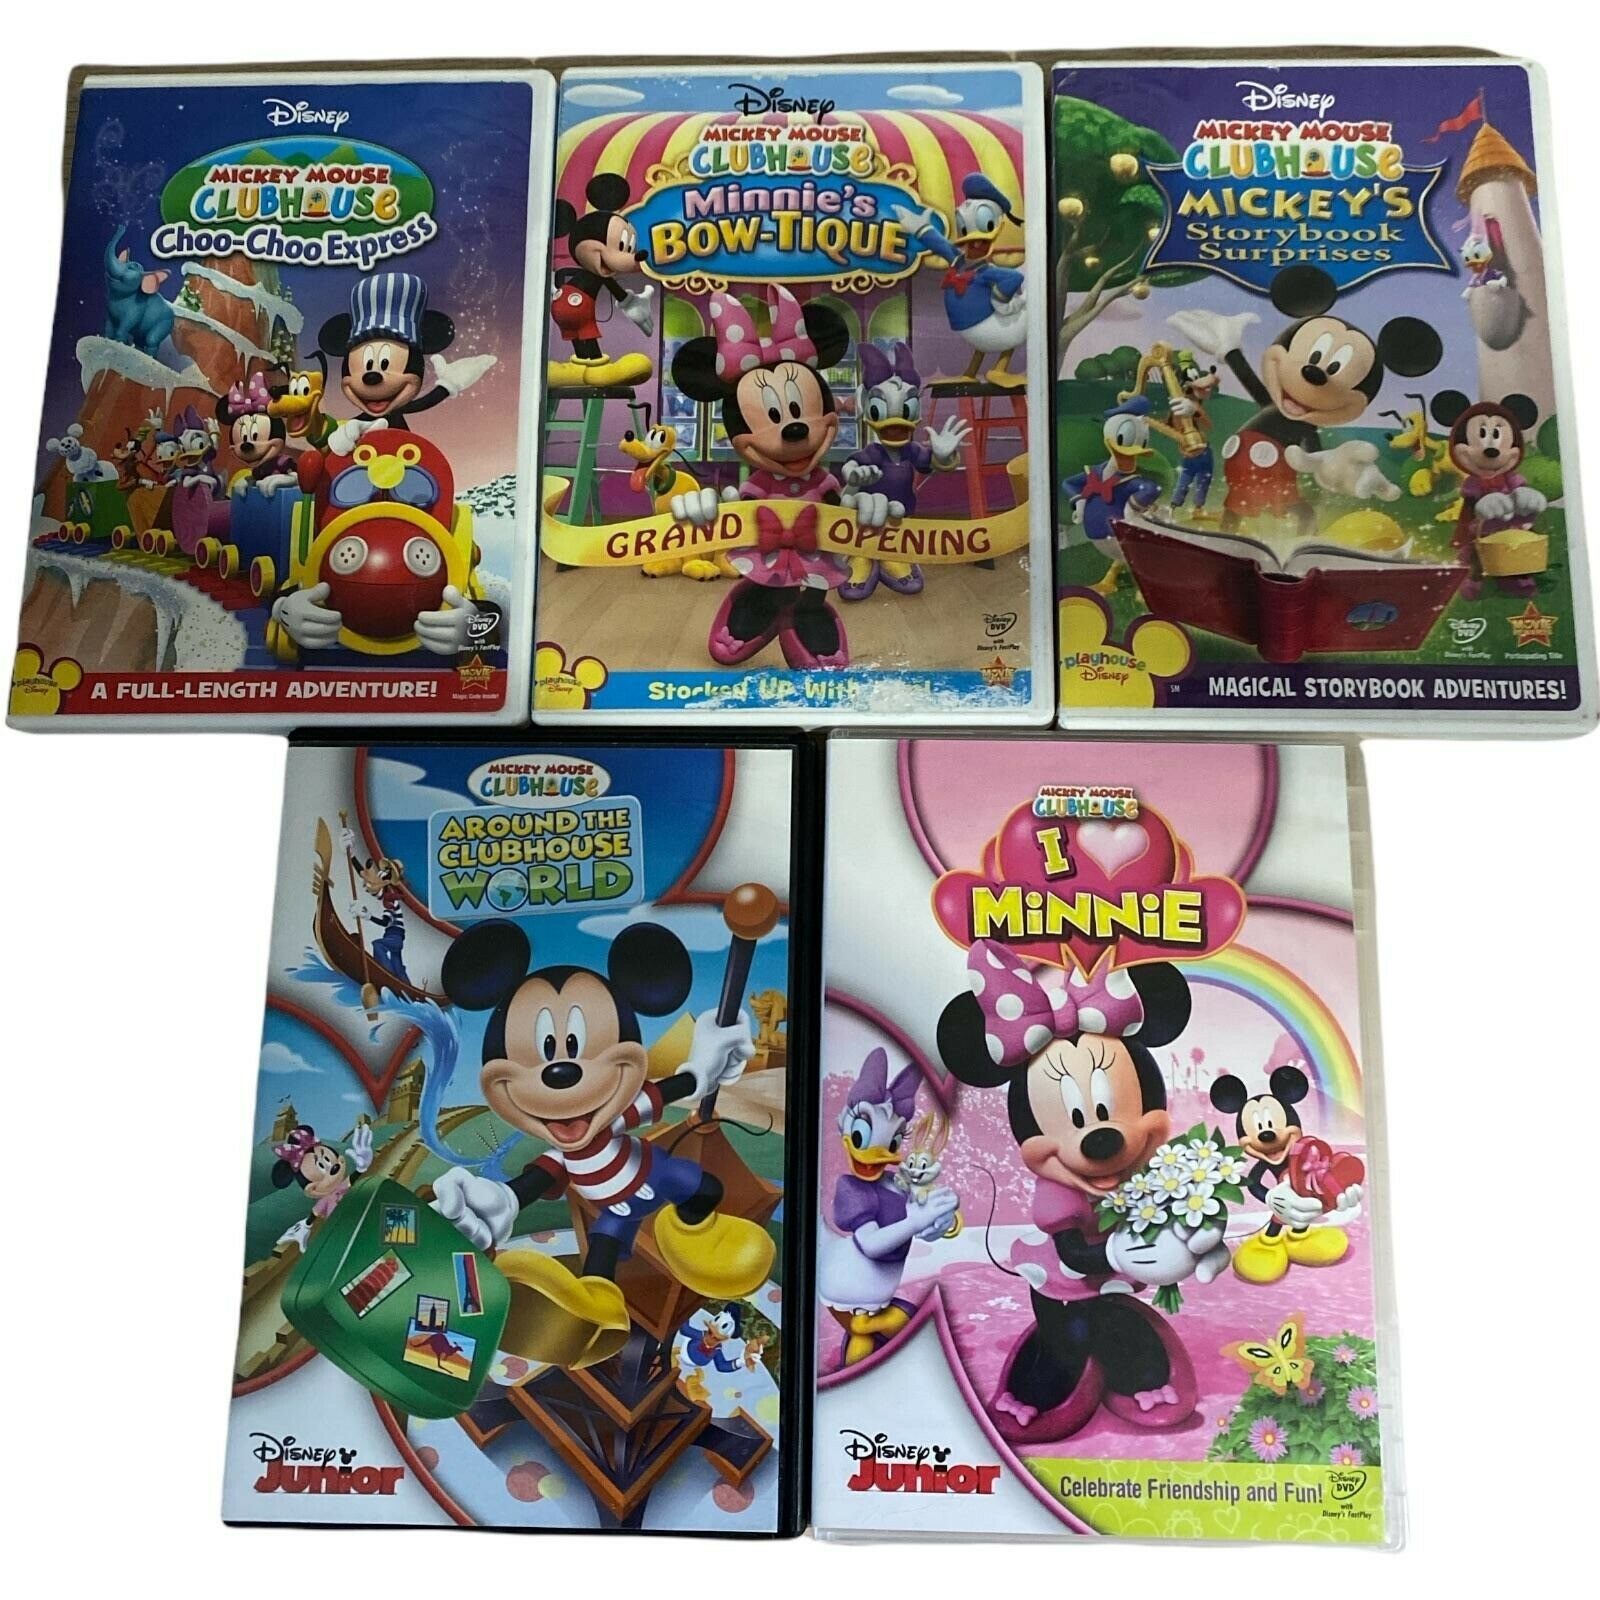 Mickey Mouse Clubhouse Dvd Collection - Heresfil 659